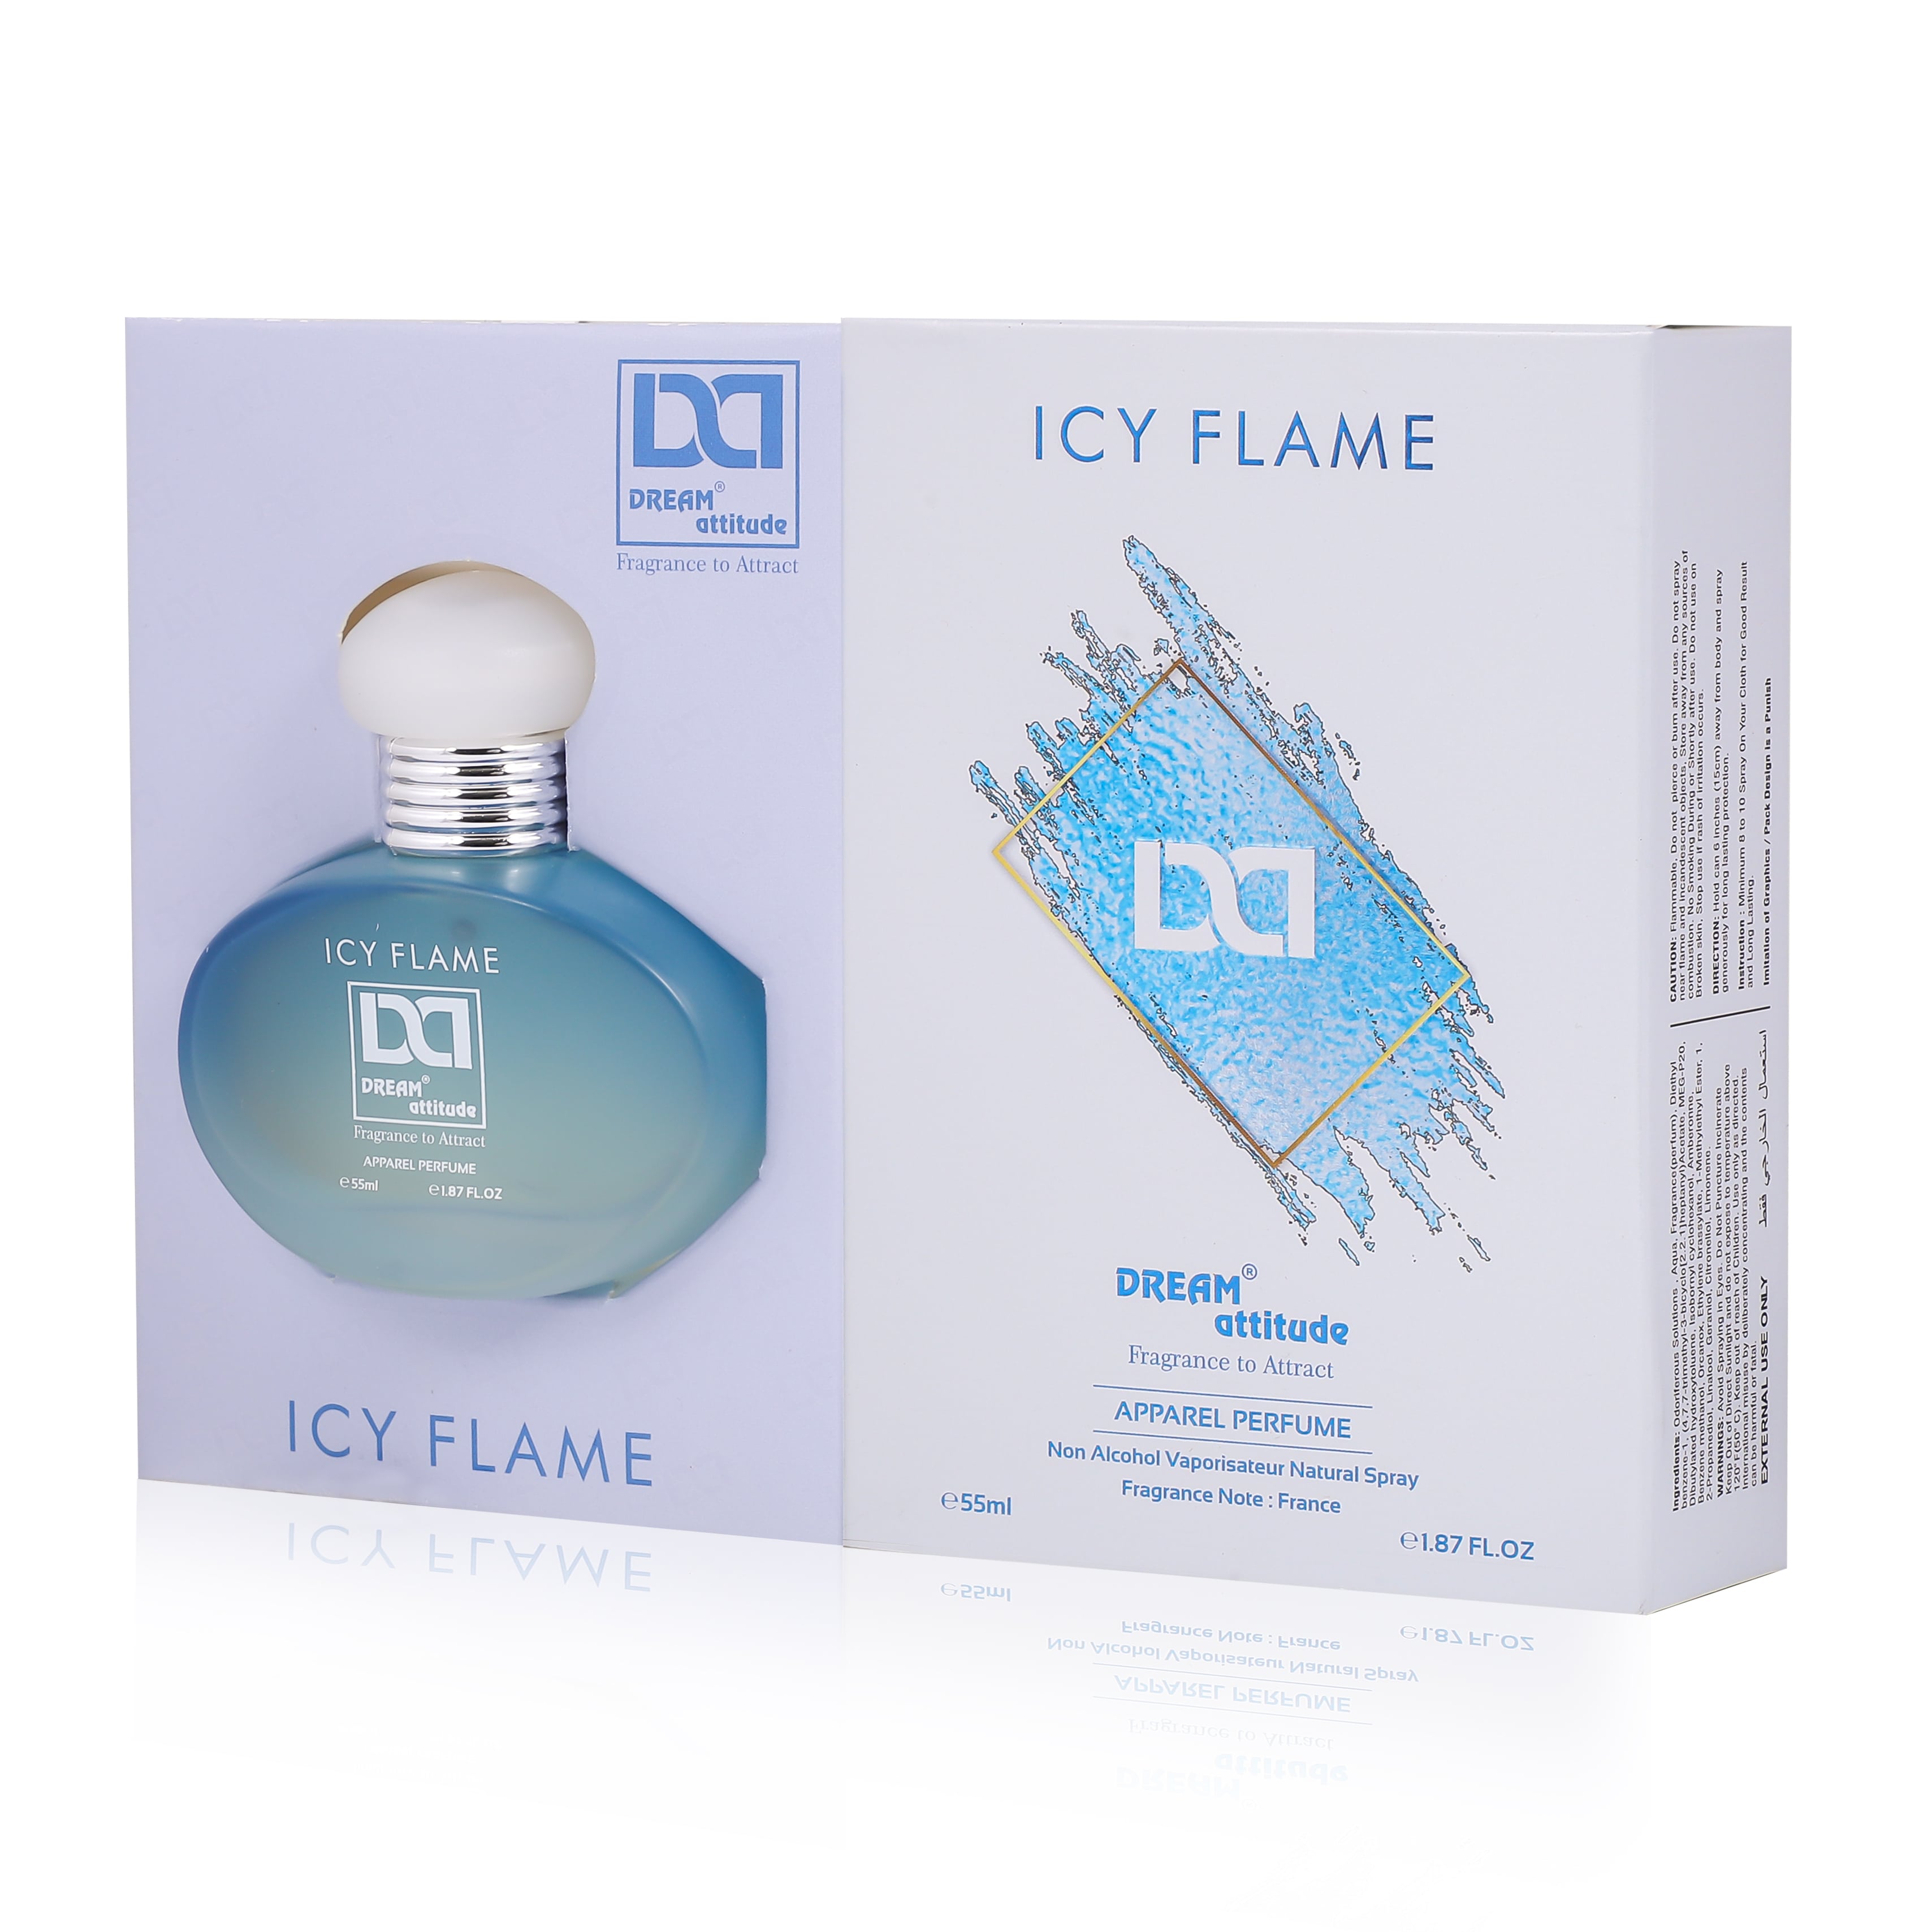 DREAM attitude Icy Flame Perfume: Bold Fusion of Cool and Fiery Sophistication